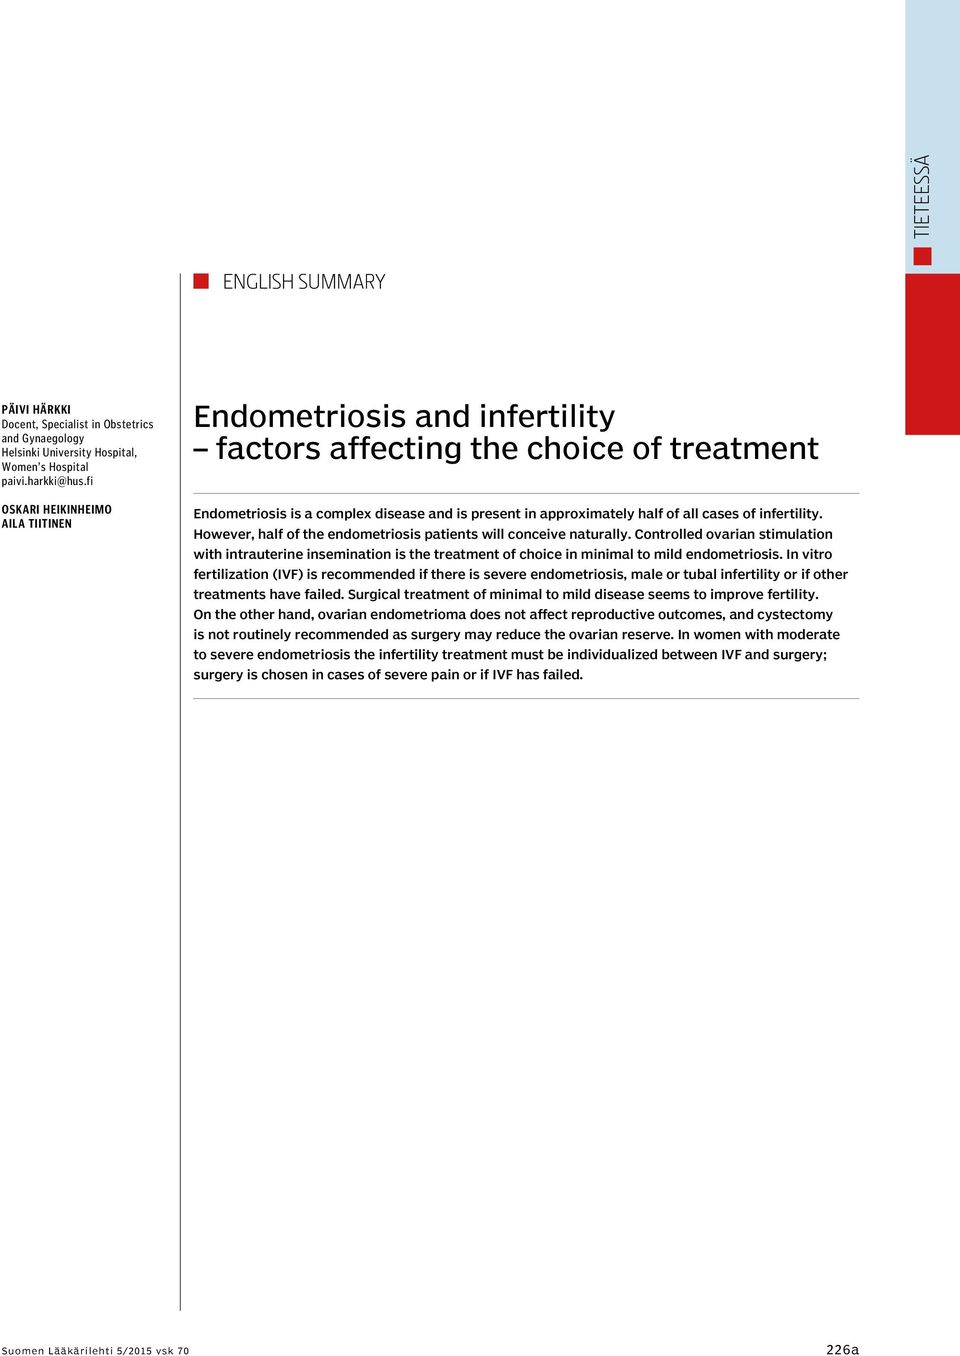 infertility. However, half of the endometriosis patients will conceive naturally.